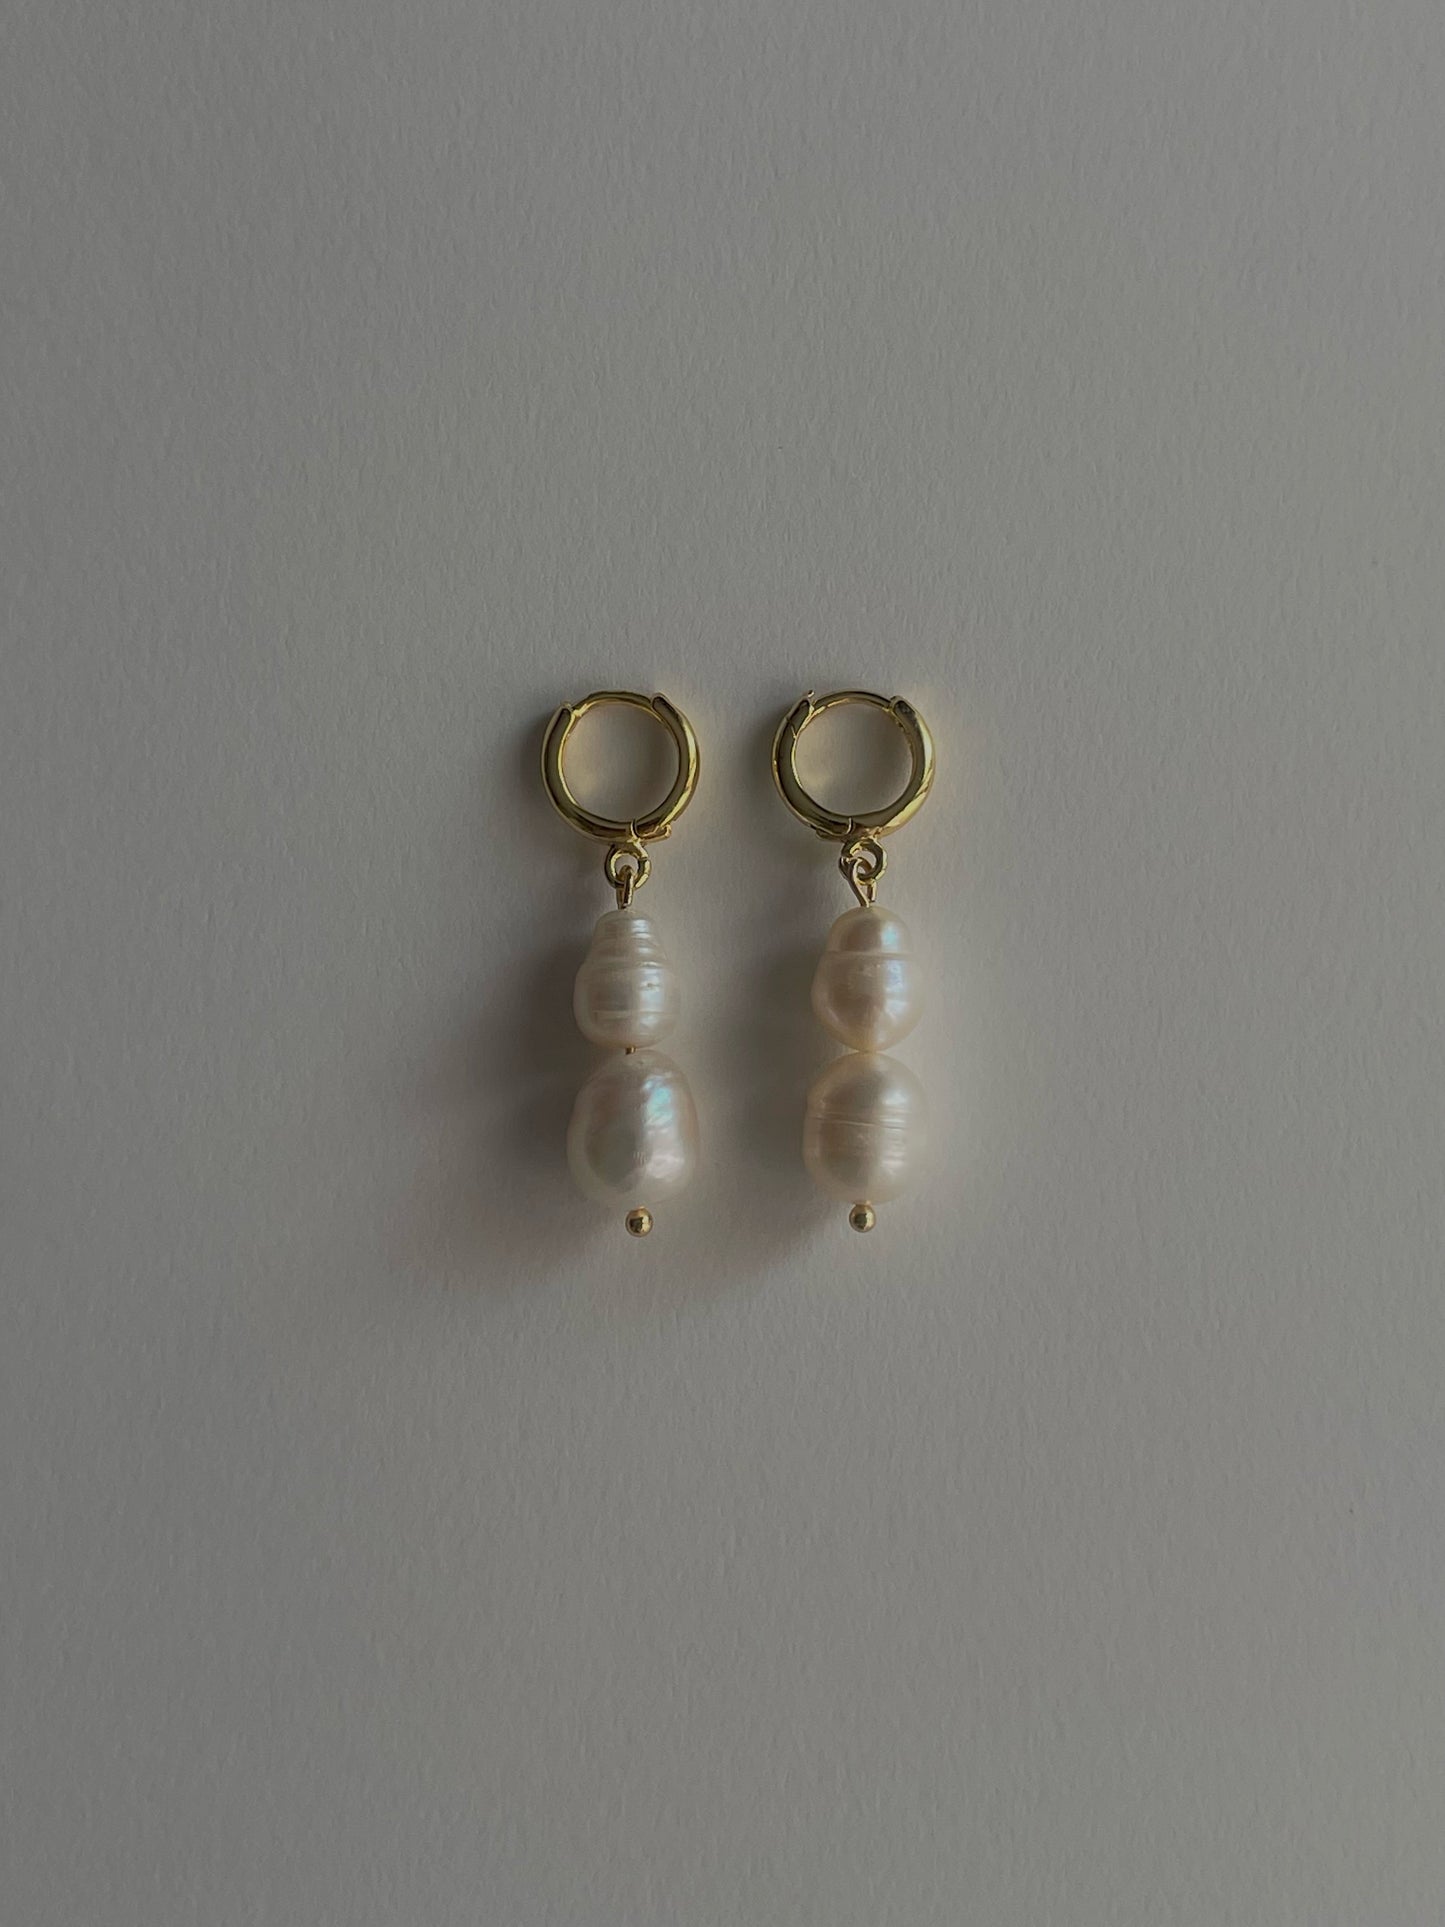 Cultivated pearl earrings